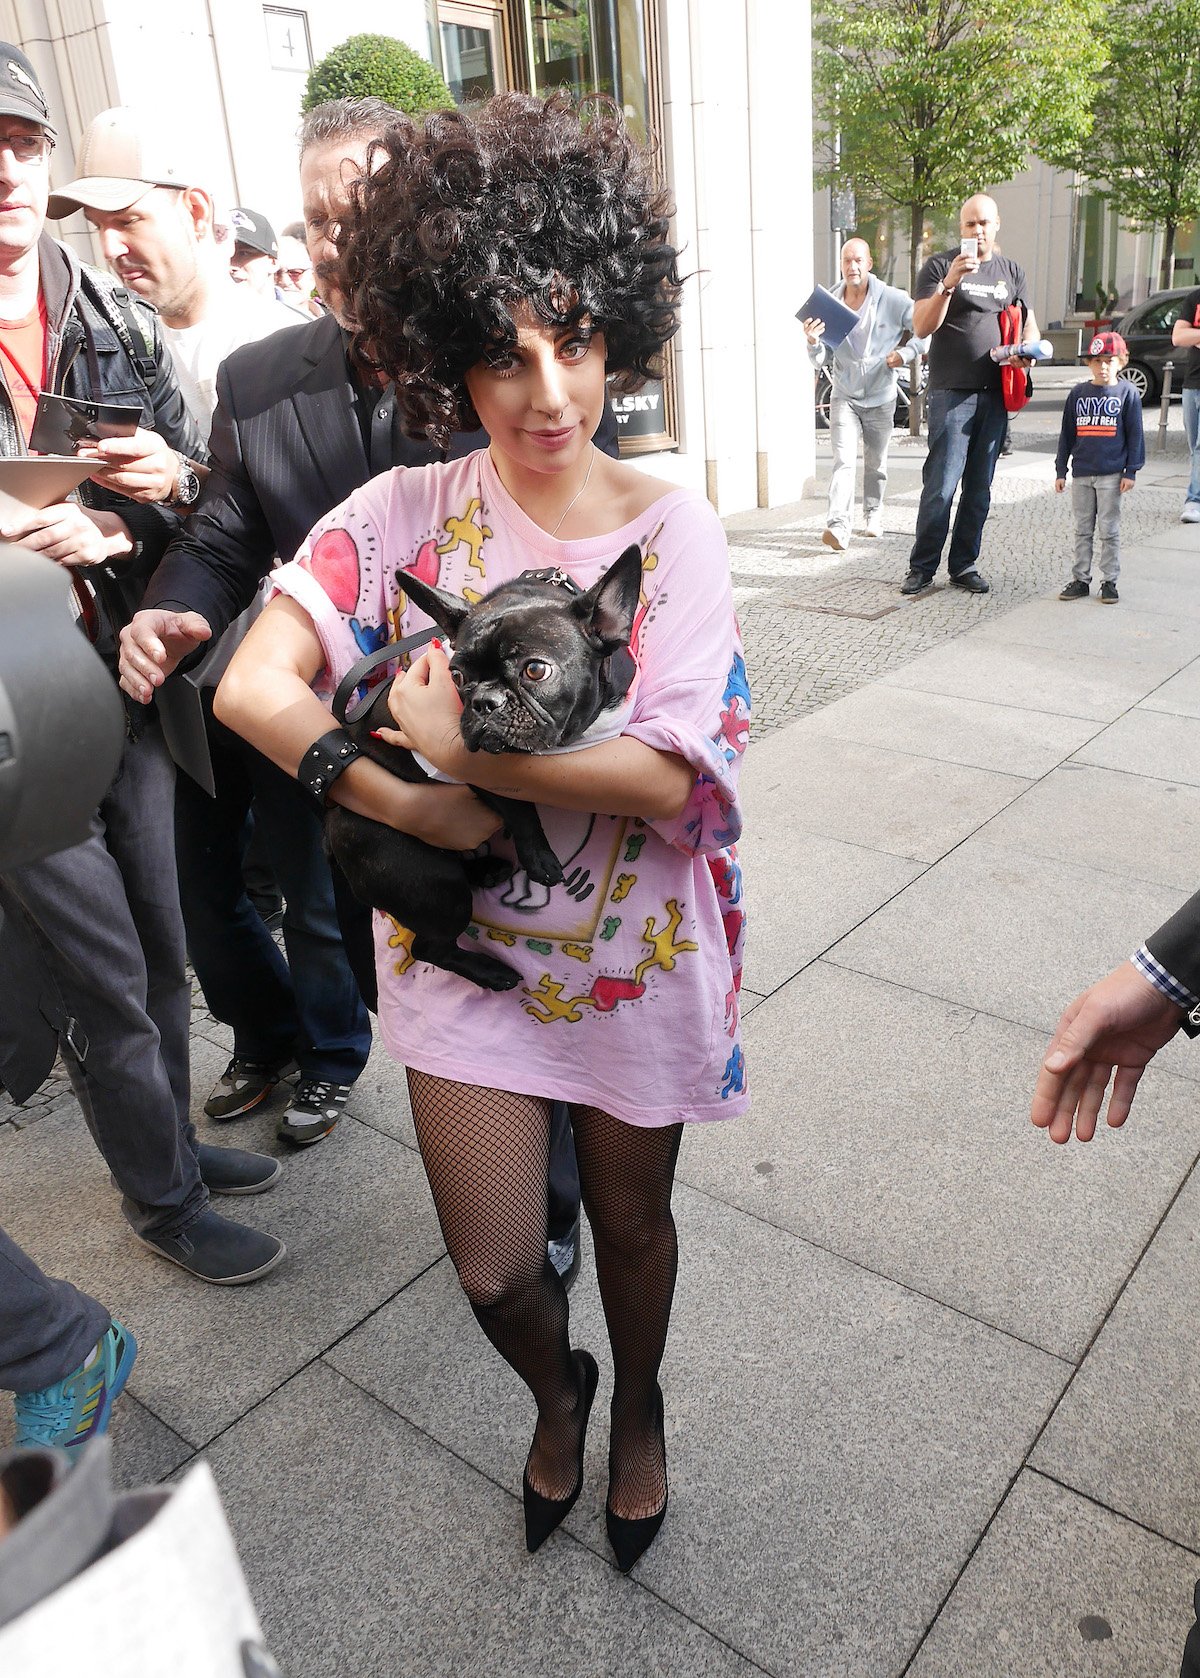 Lady Gaga in an oversized pink shirt and curly black wig holding a black dog.